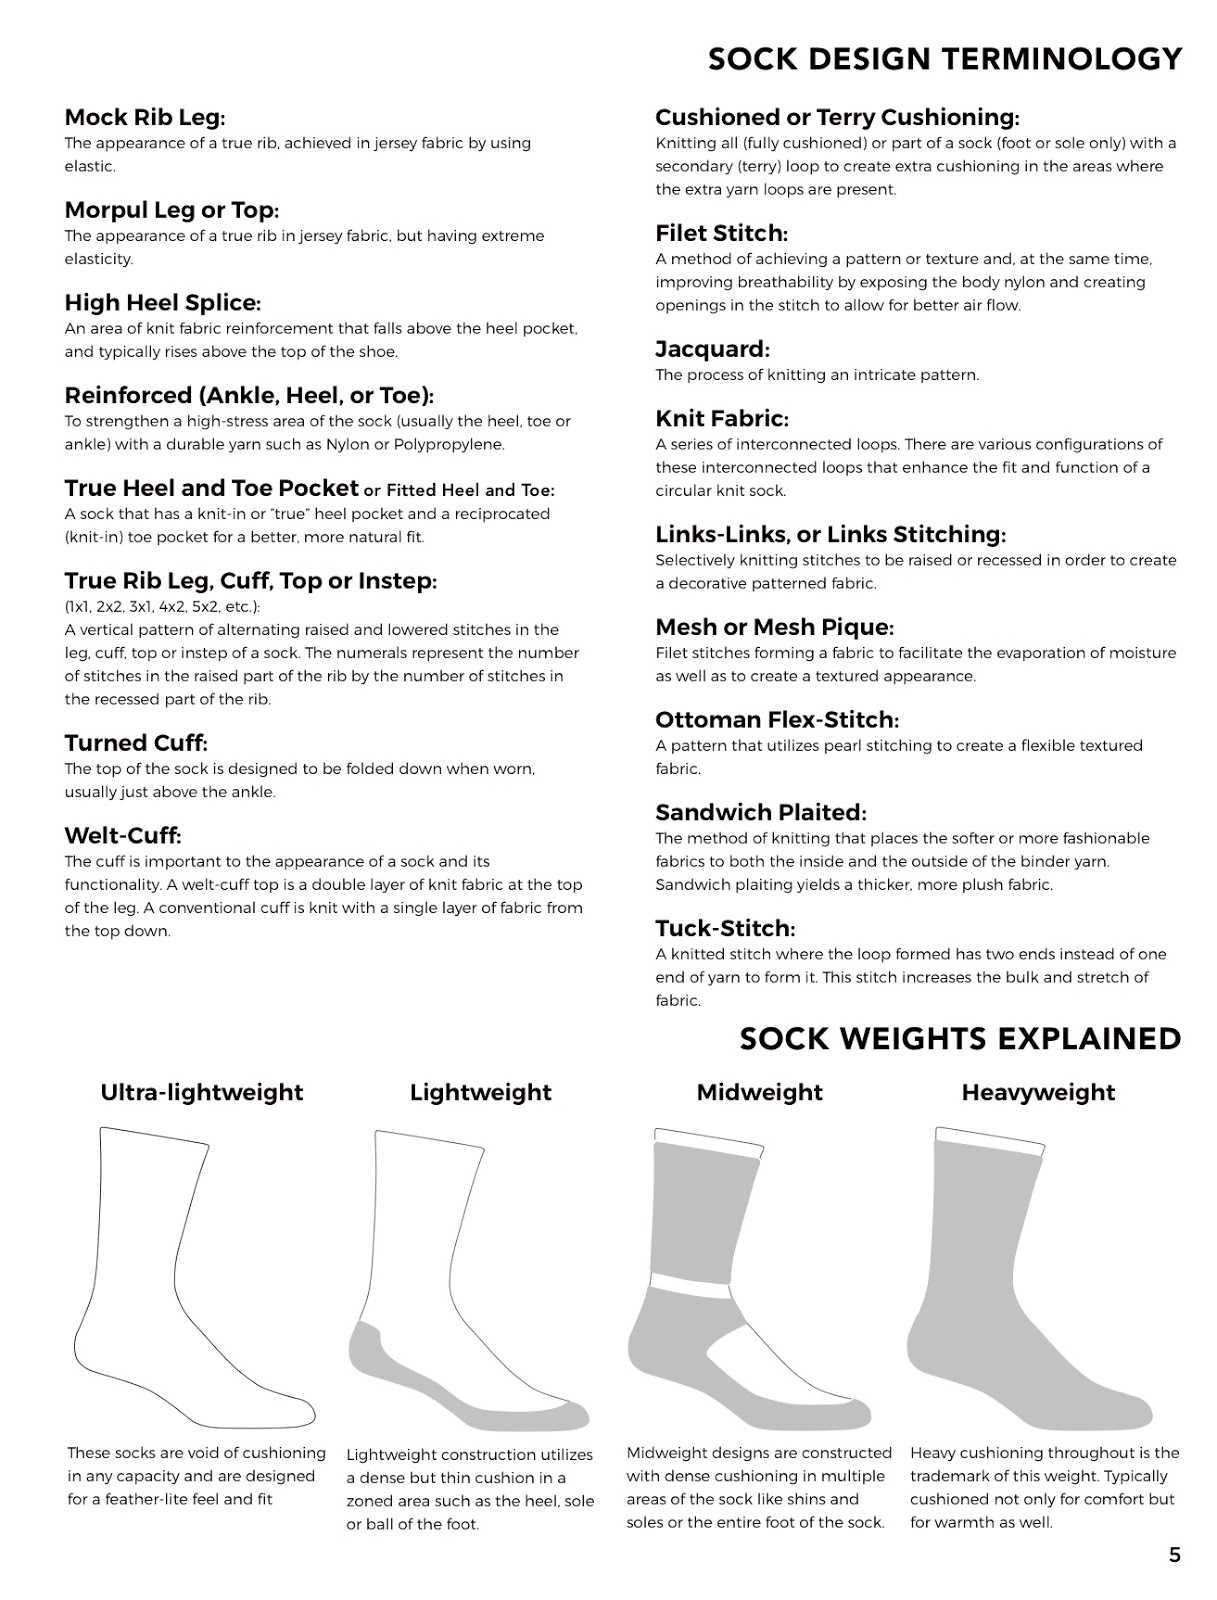 Anatomy Of A Sock – Nordiclife